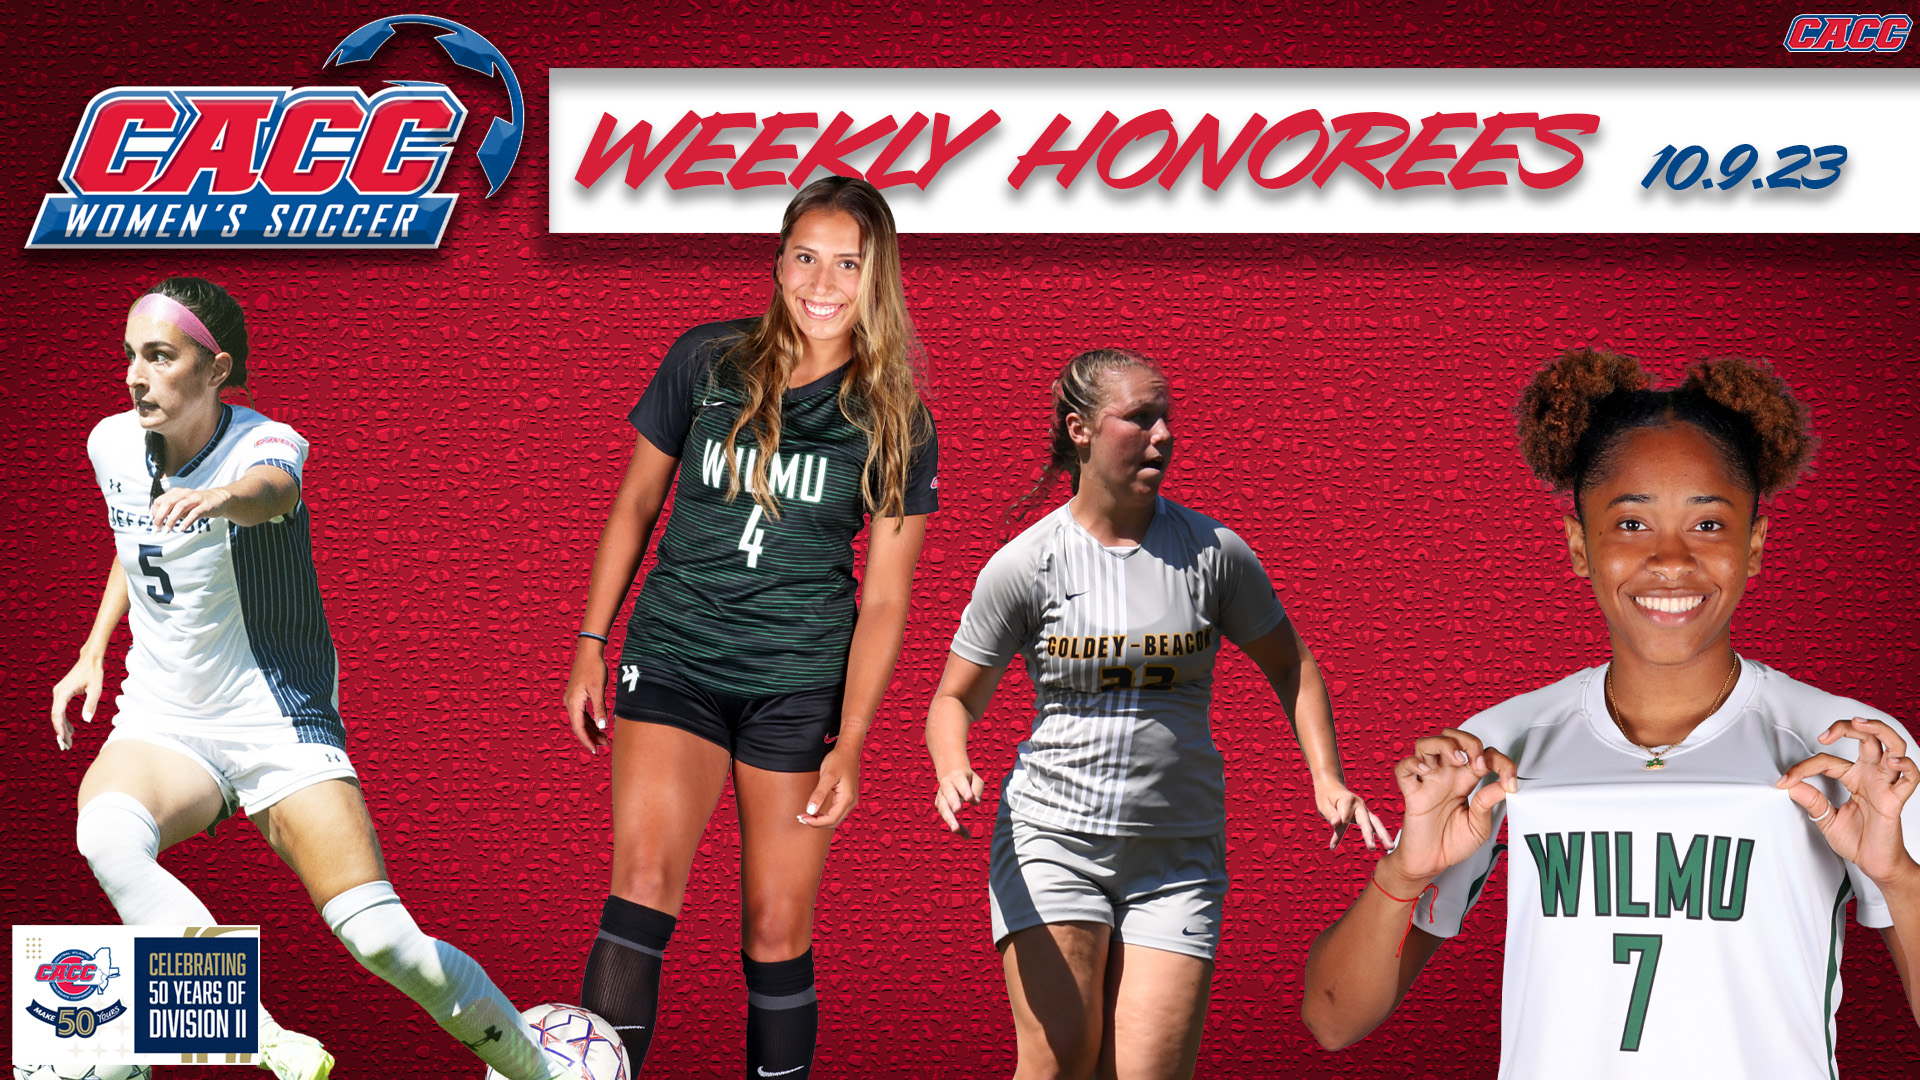 CACC Women's Soccer Weekly Honorees (10-9-23)